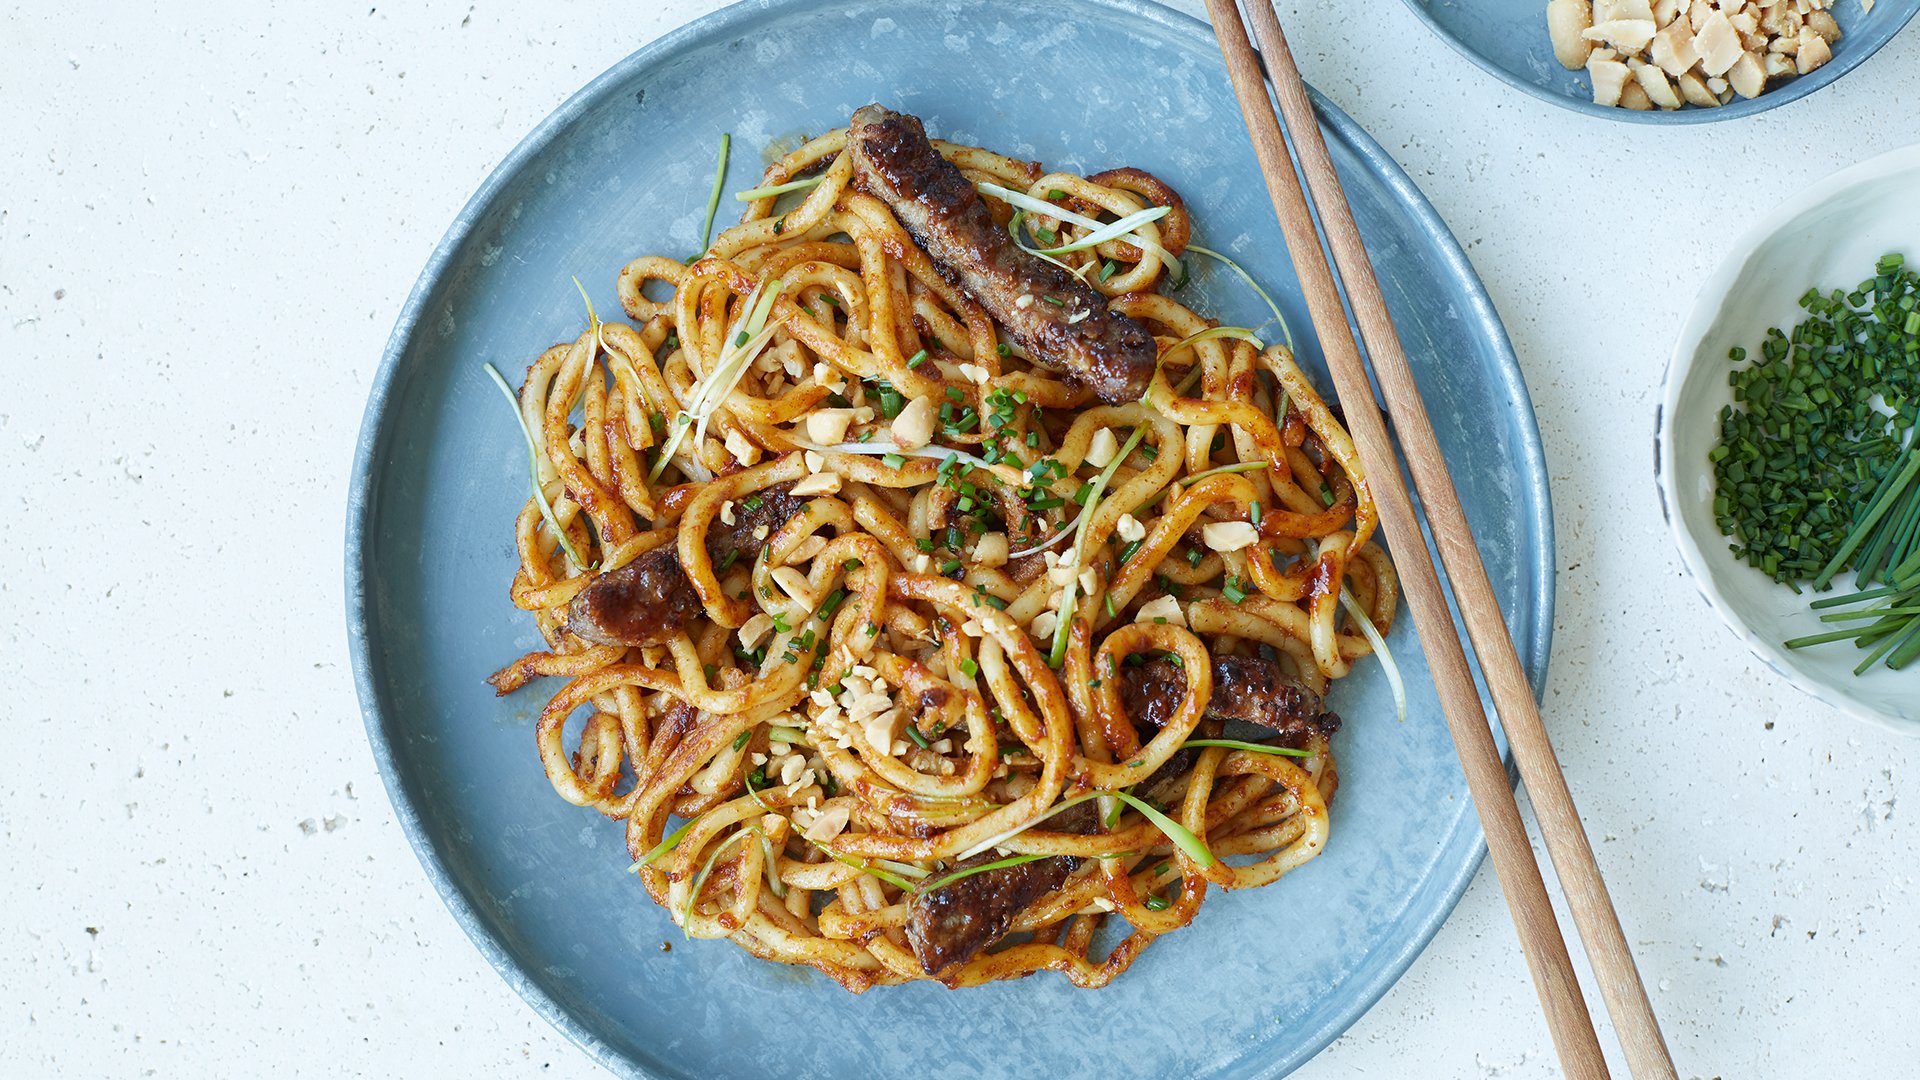 Miso Tasty Yaki Udon Noodles with Crispy Beef Strips, Crushed Peanuts & Chives